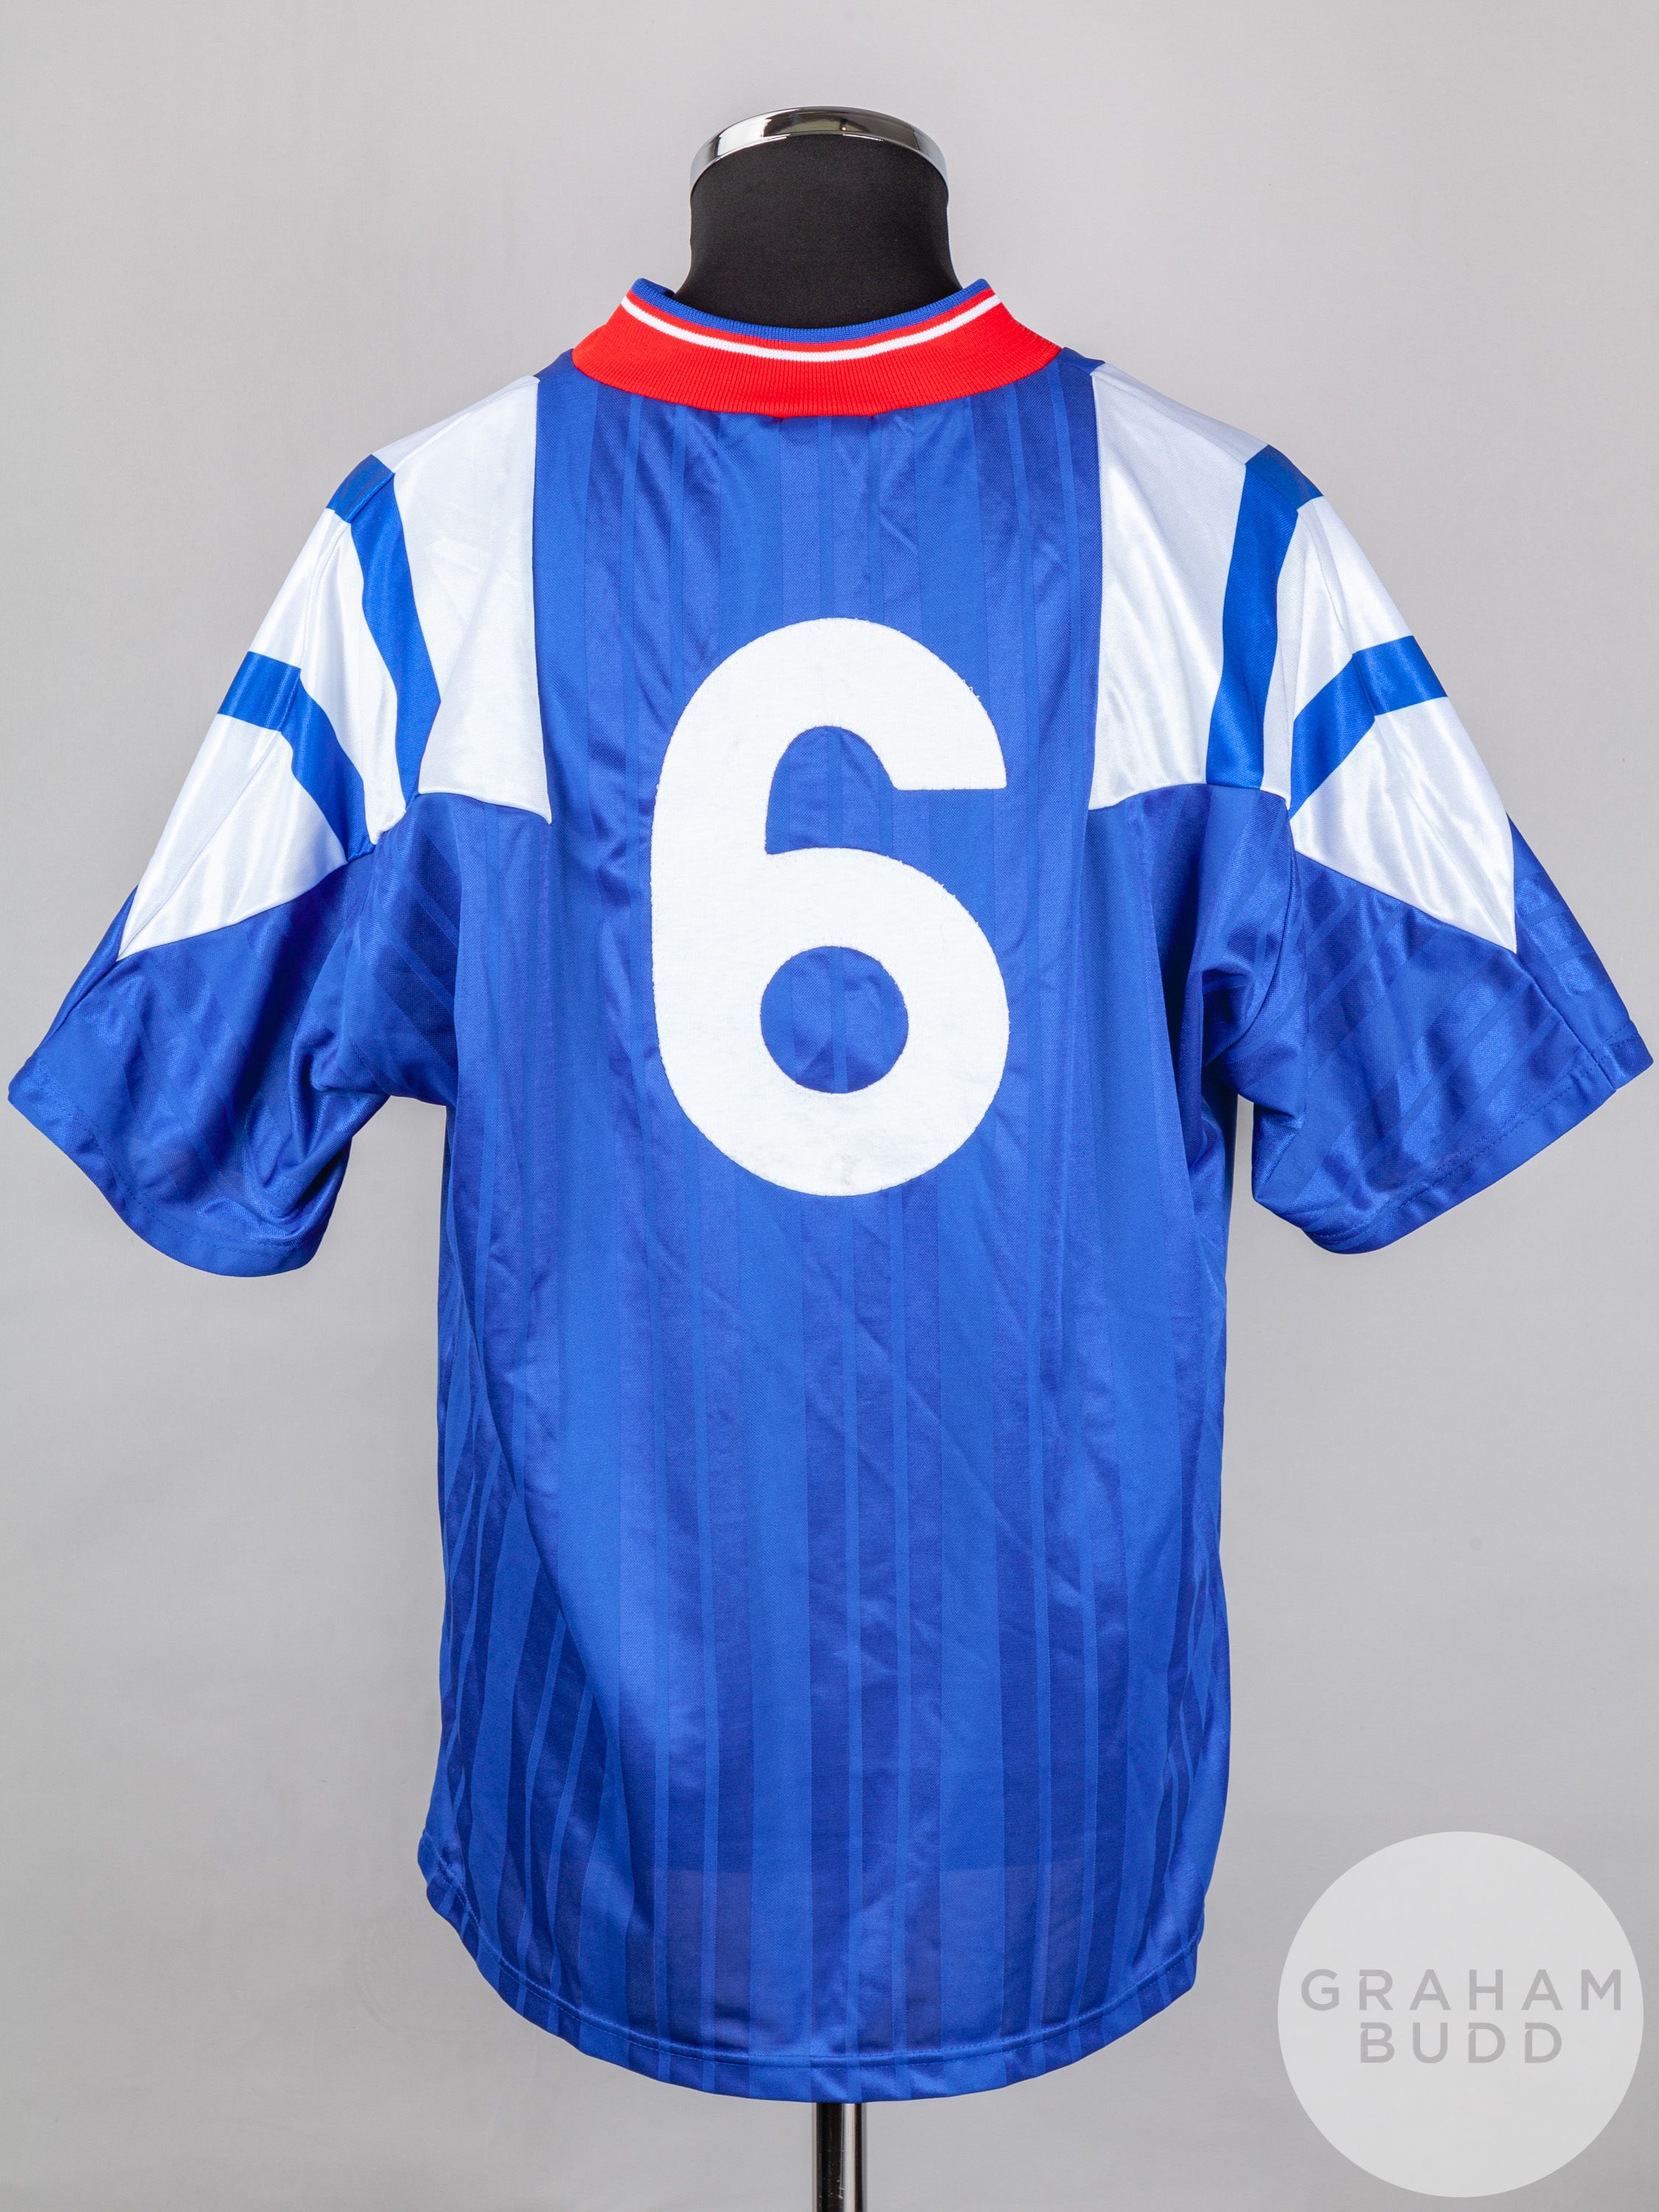 John Brown blue, white and red No.6 Rangers short-sleeved shirt, 1992-94, - Image 2 of 5